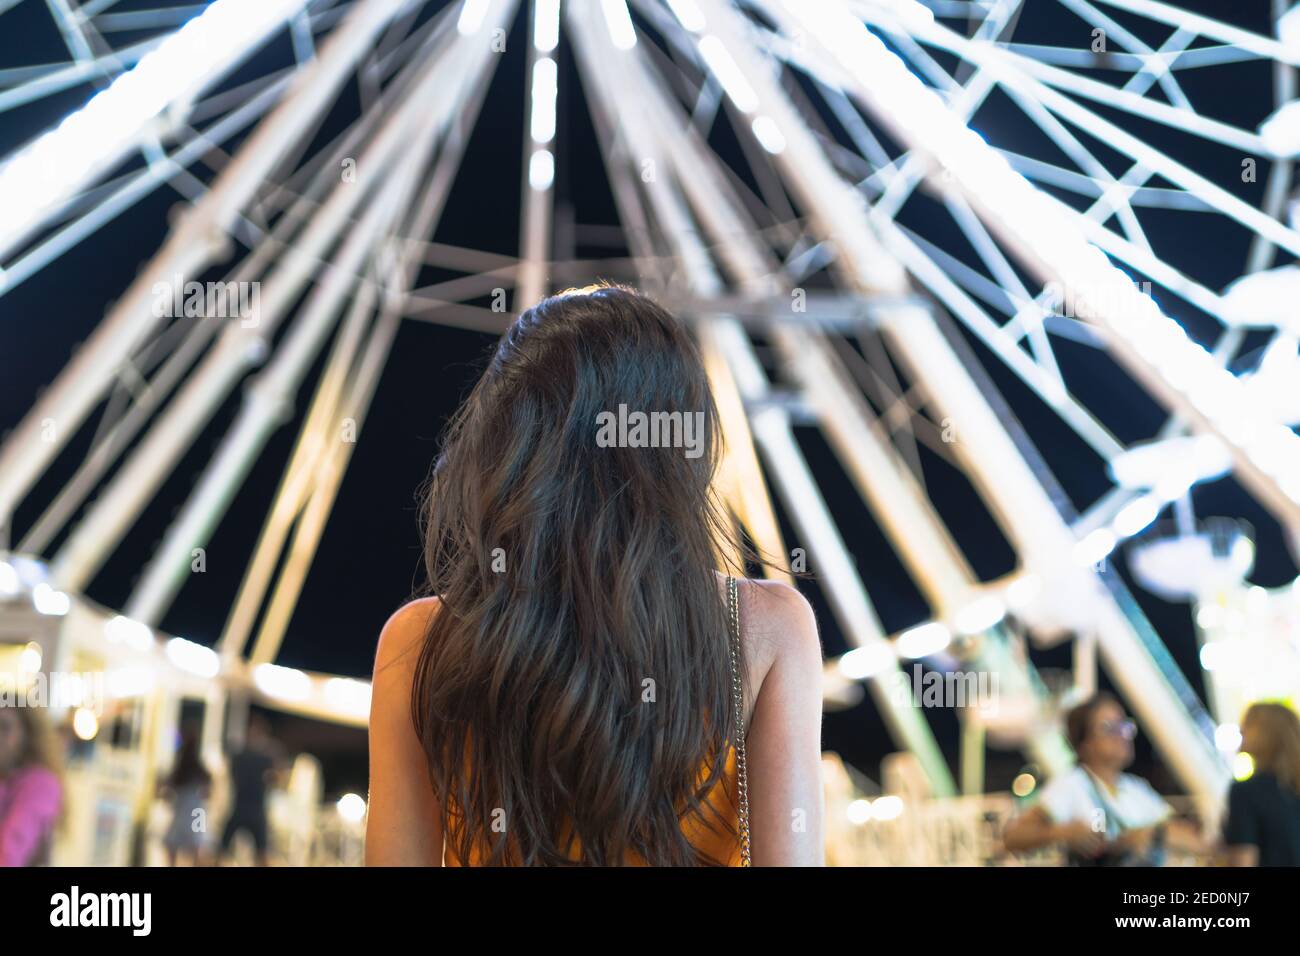 Back view of woman with long brown hair looking at the Ferris Wheel lights in the night Stock Photo